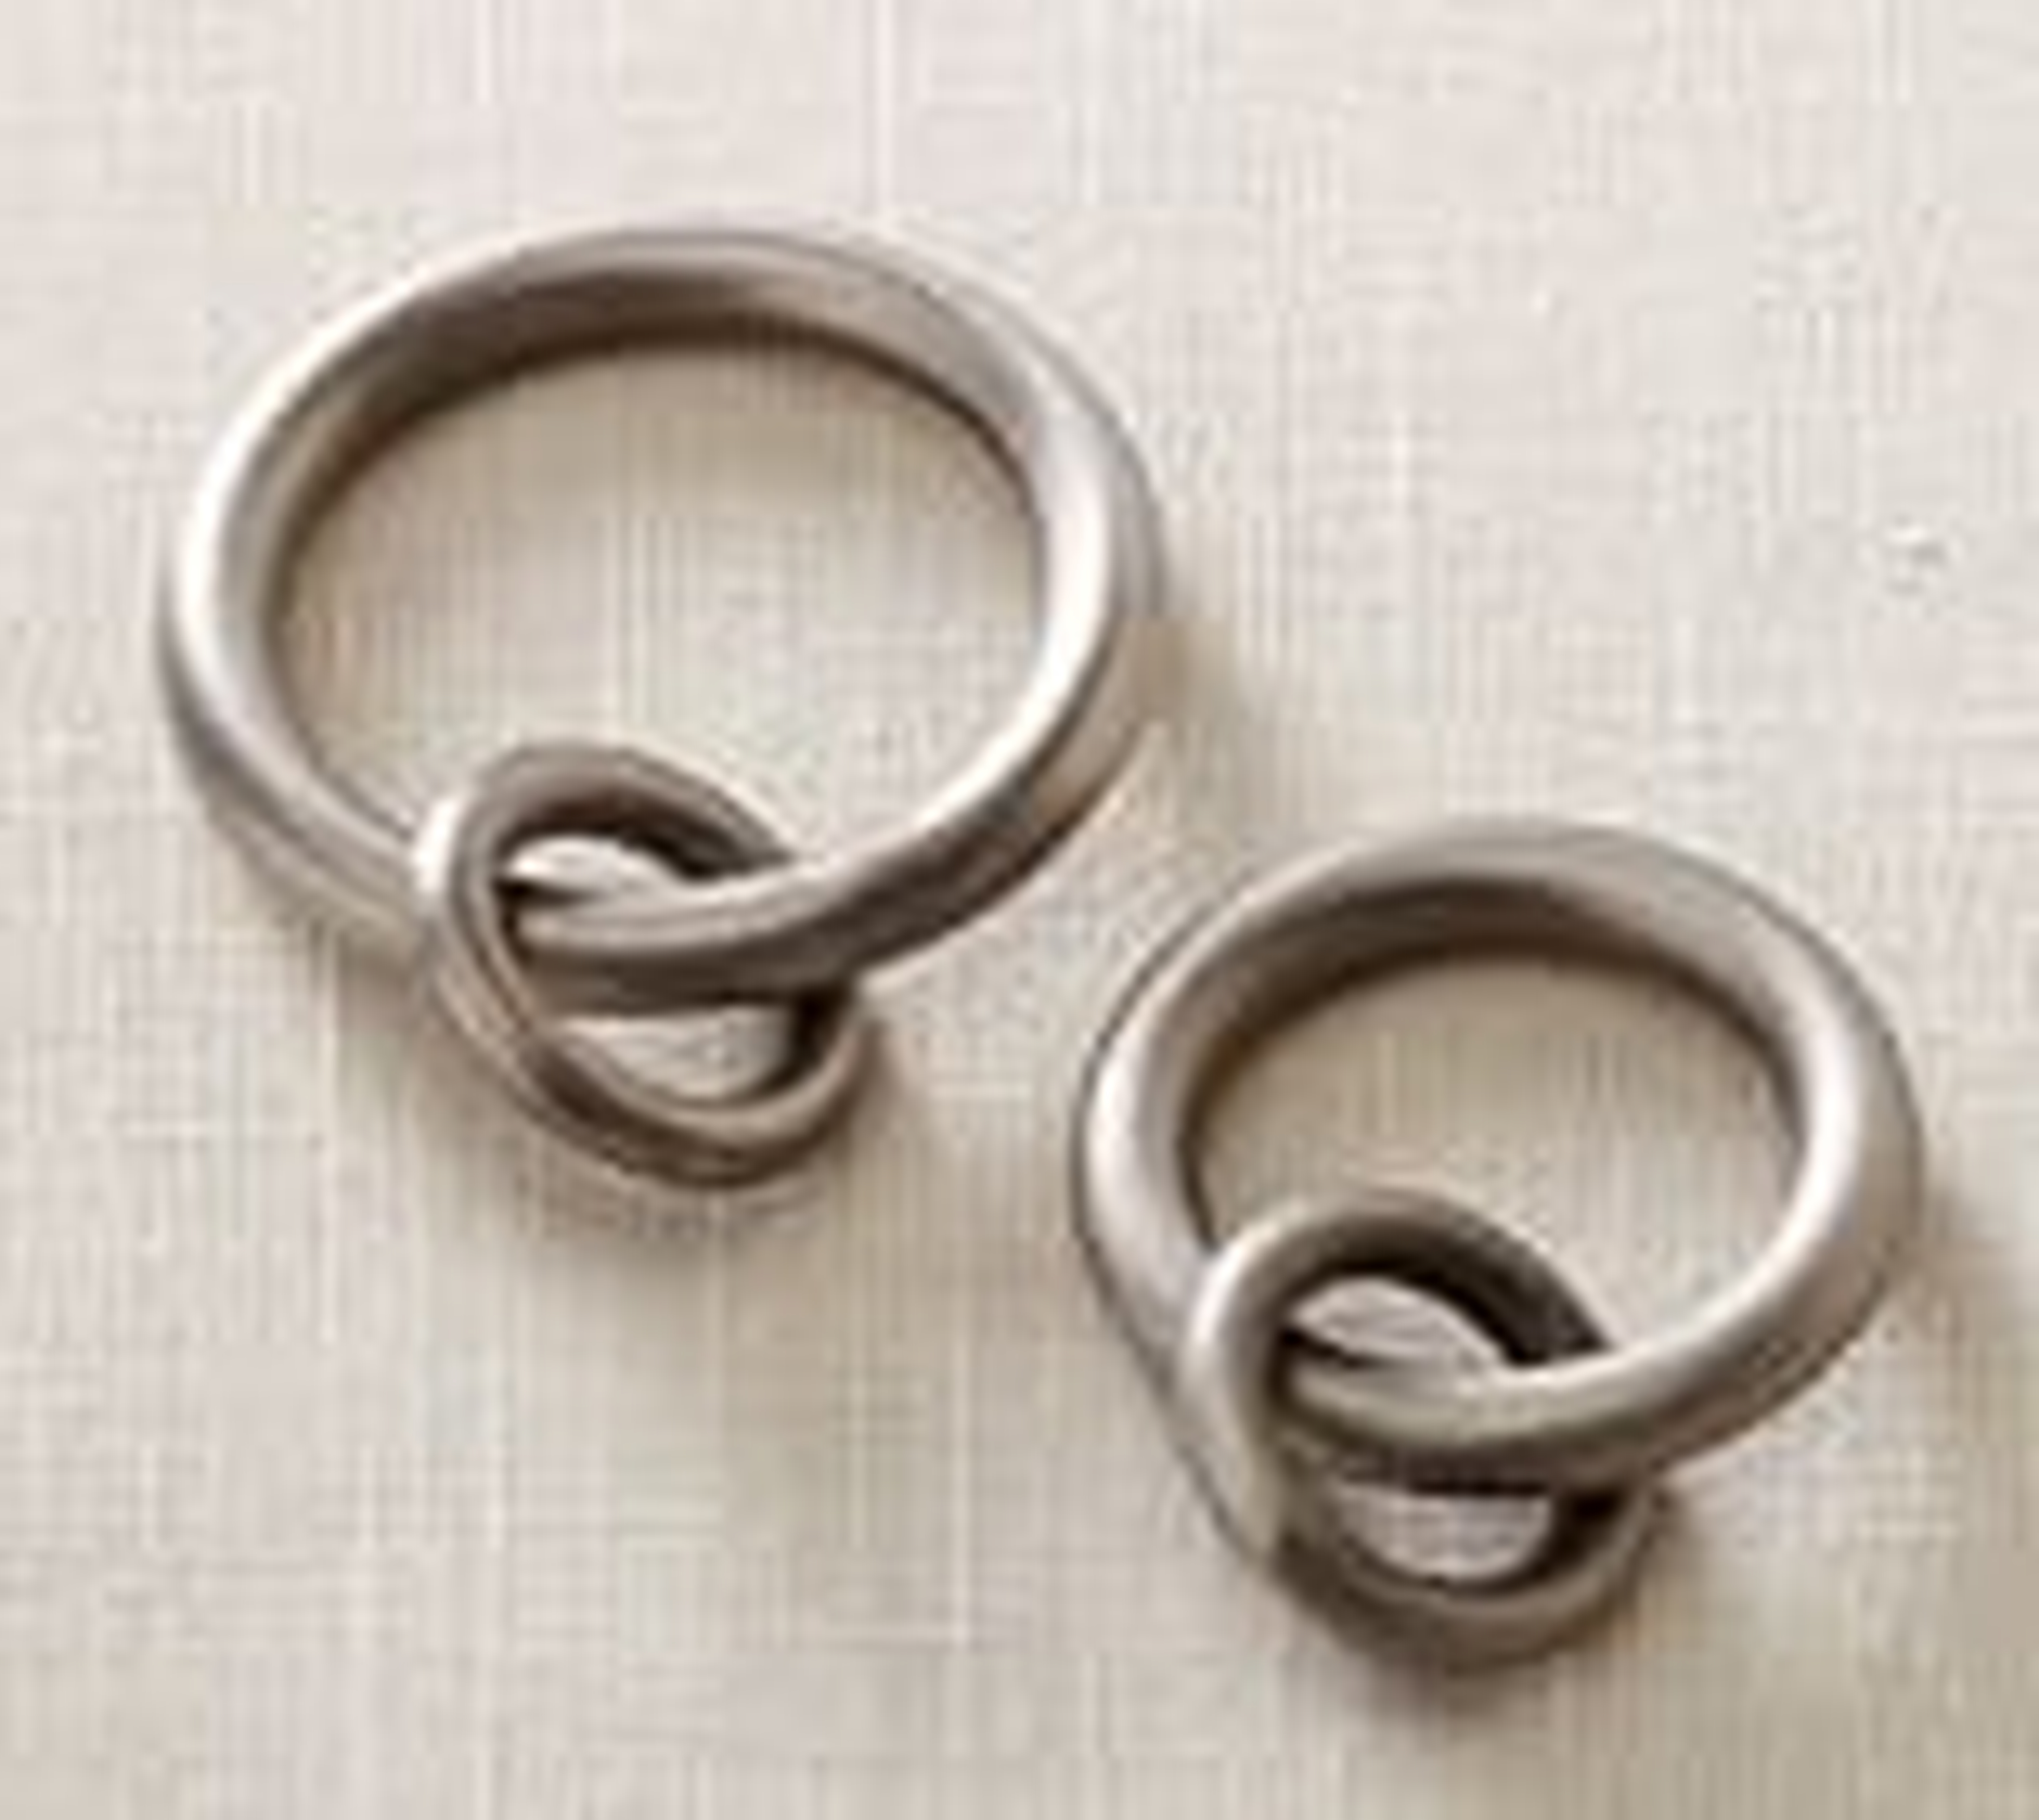 PB Standard Round Rings, Set of 10, Small, Pewter Finish - Pottery Barn